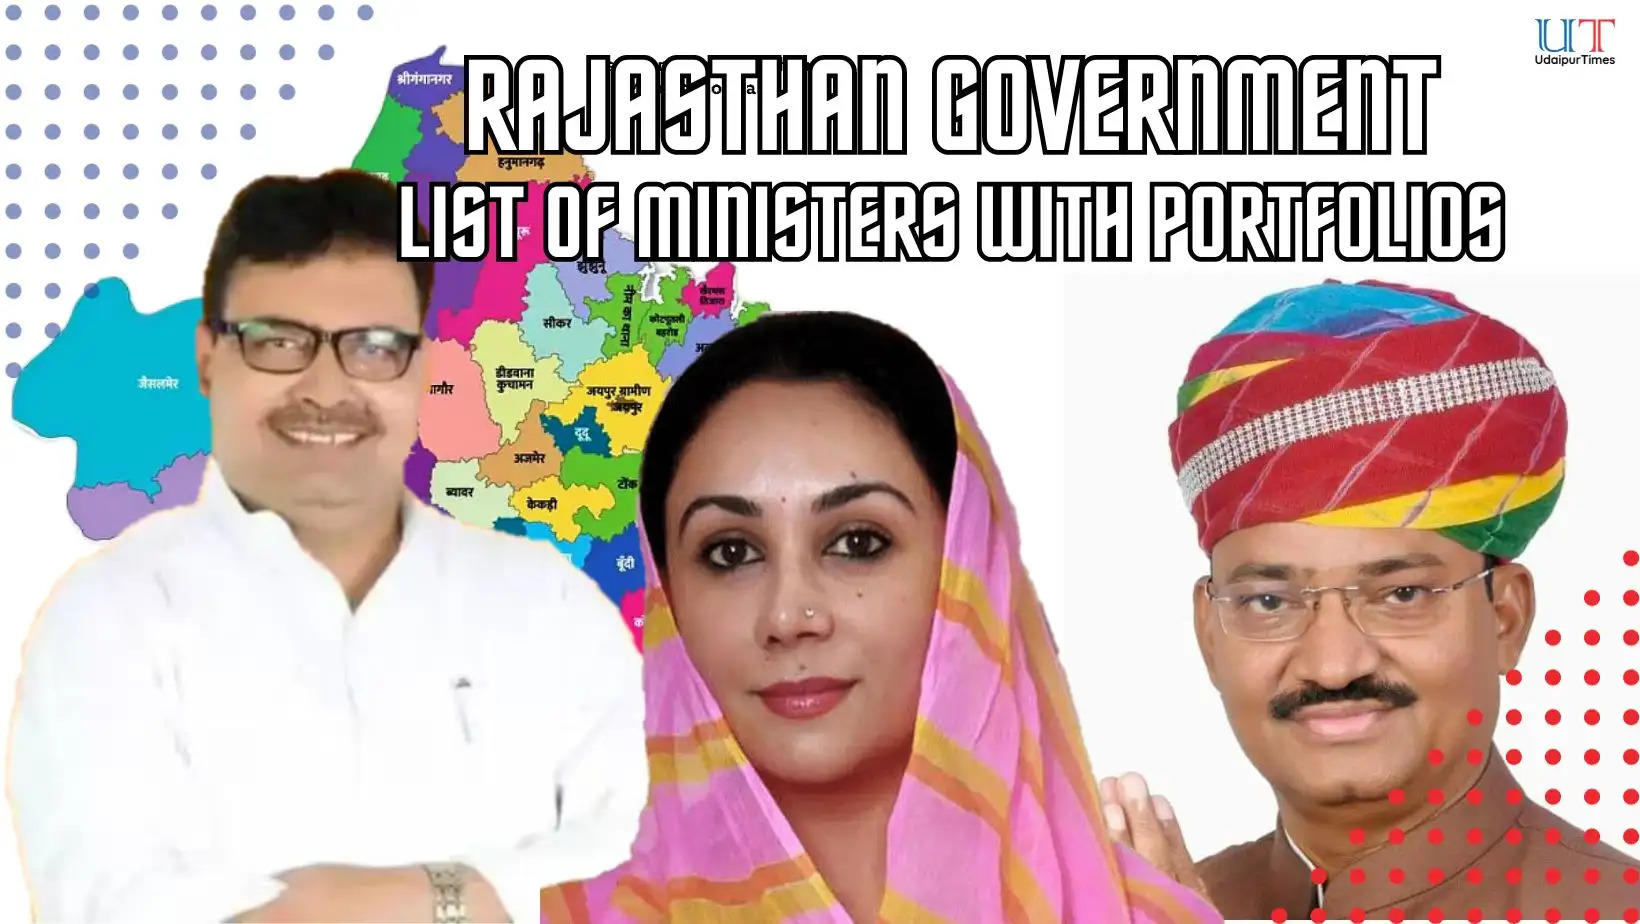 List of Cabinet Ministers with Portfolios in Rajasthan